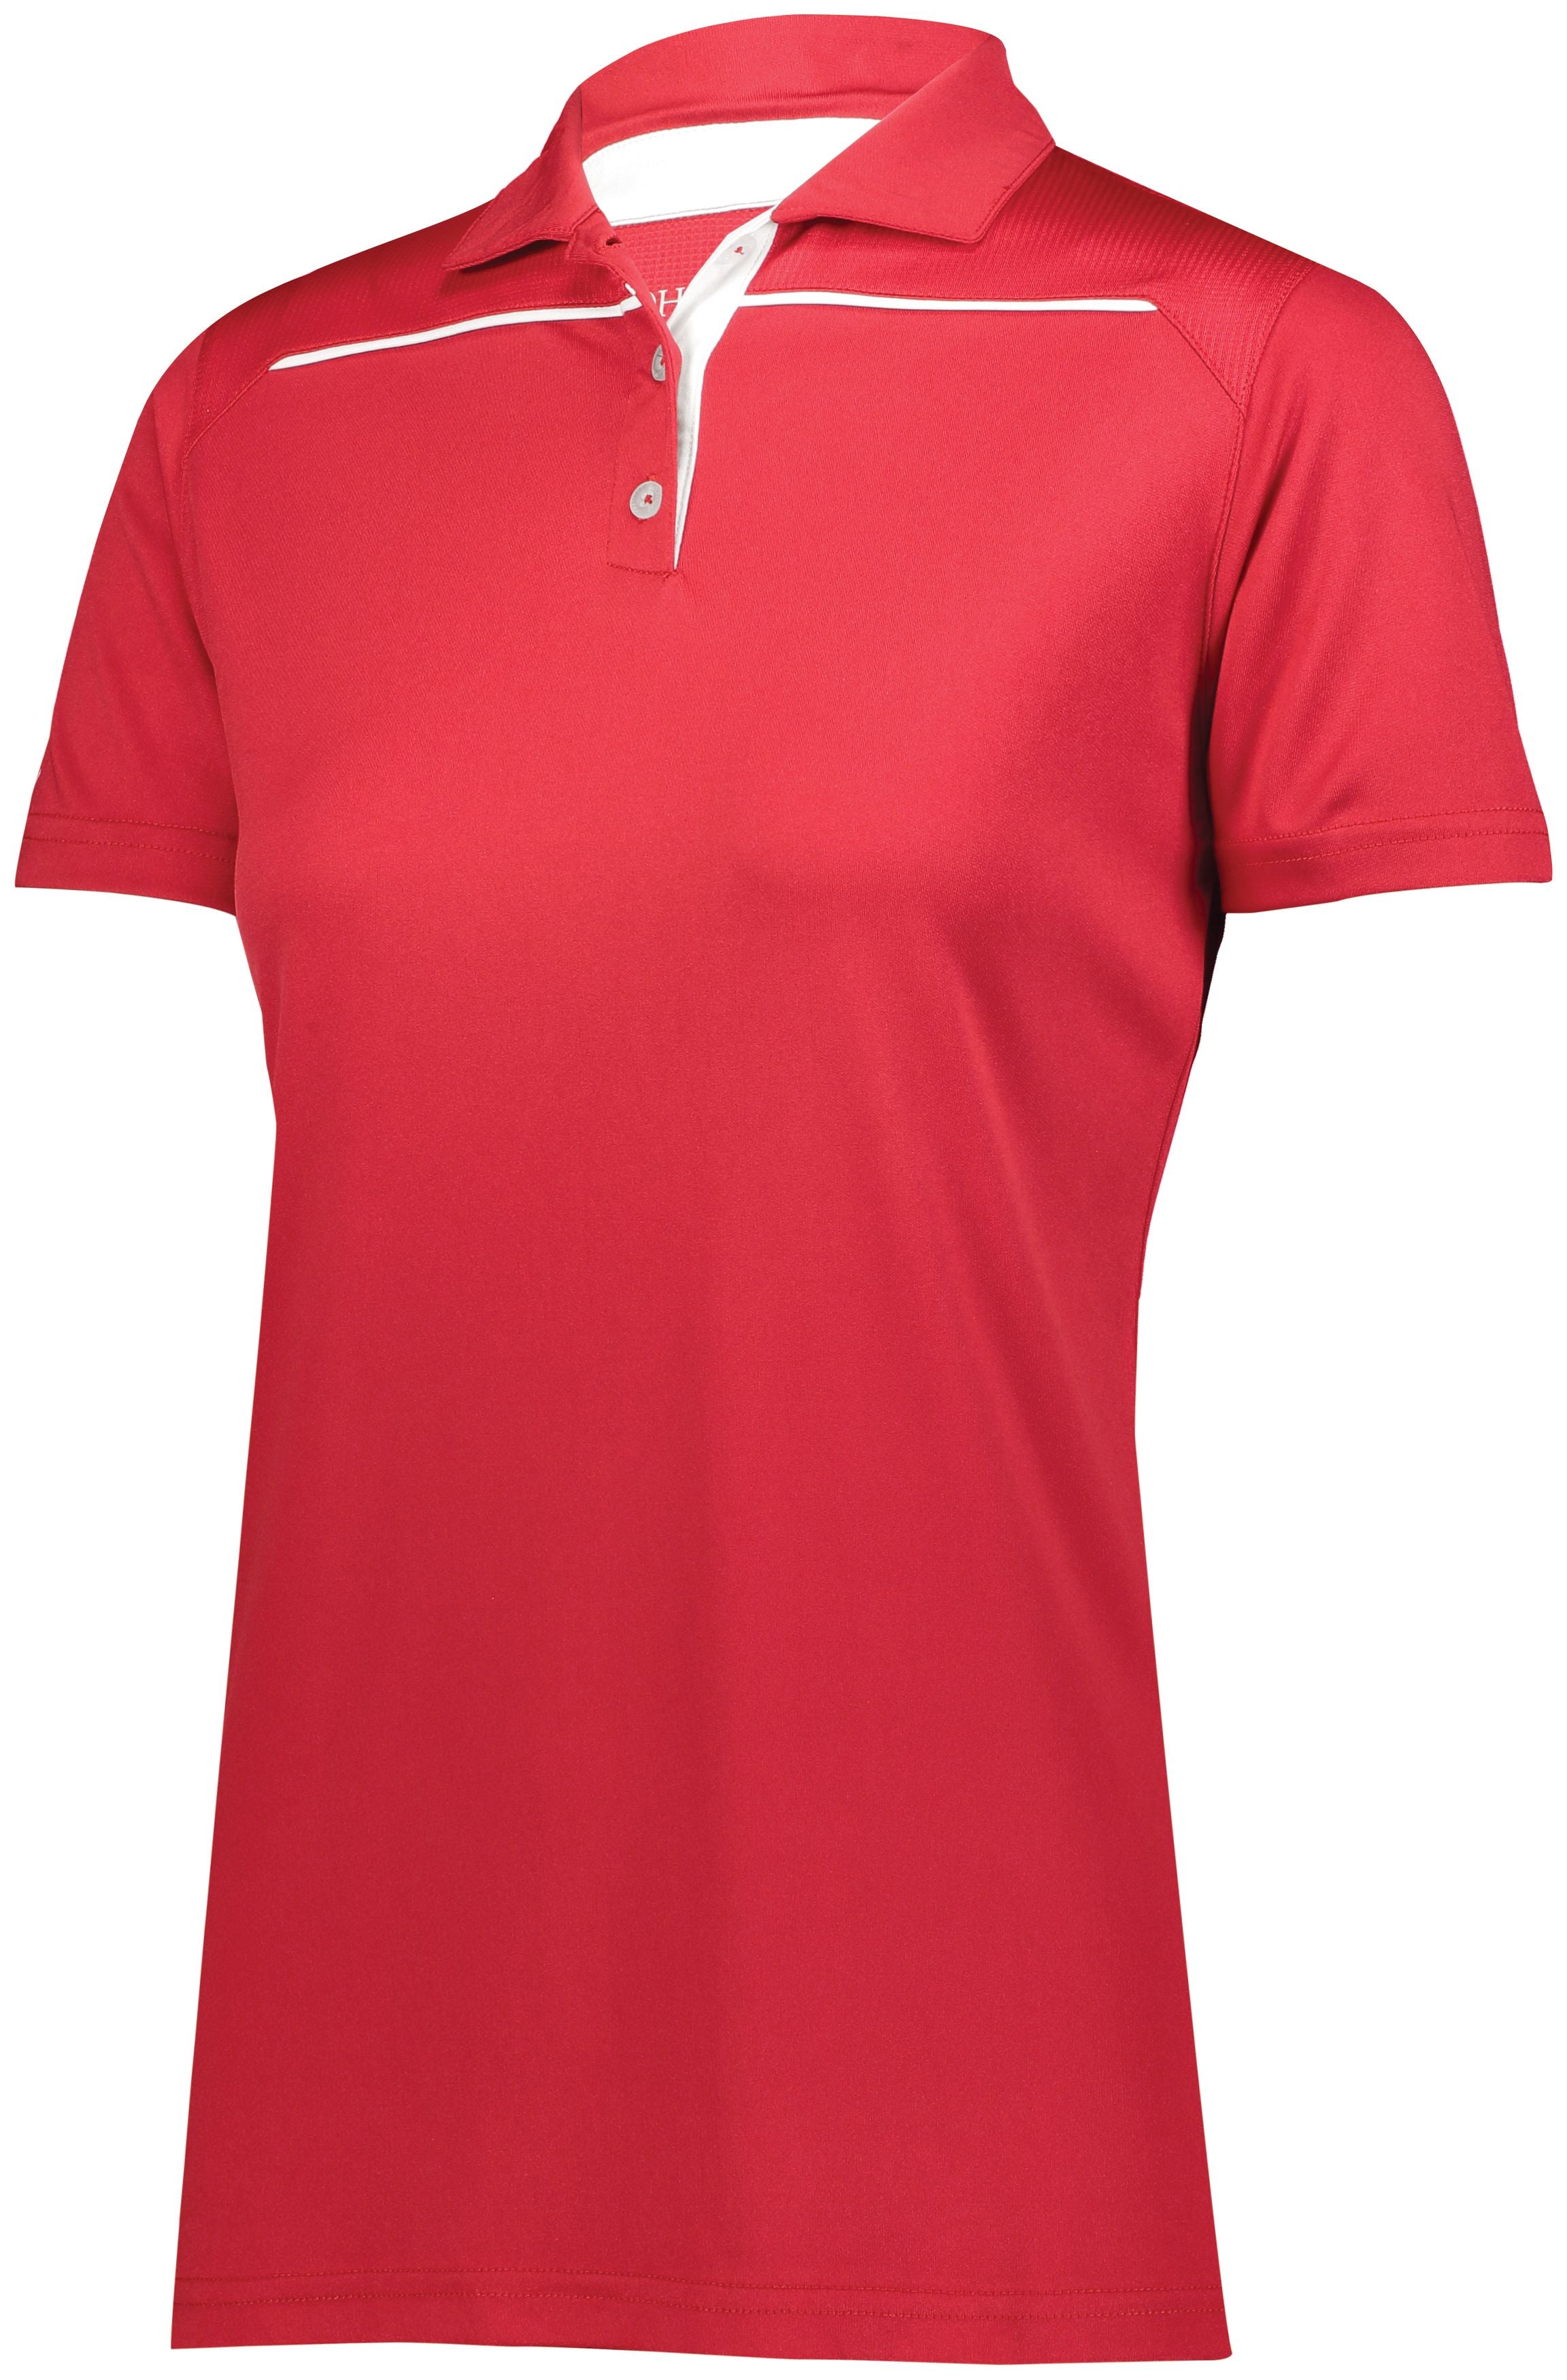 Holloway Ladies Defer Polo in Scarlet/White  -Part of the Ladies, Ladies-Polo, Polos, Holloway, Shirts product lines at KanaleyCreations.com